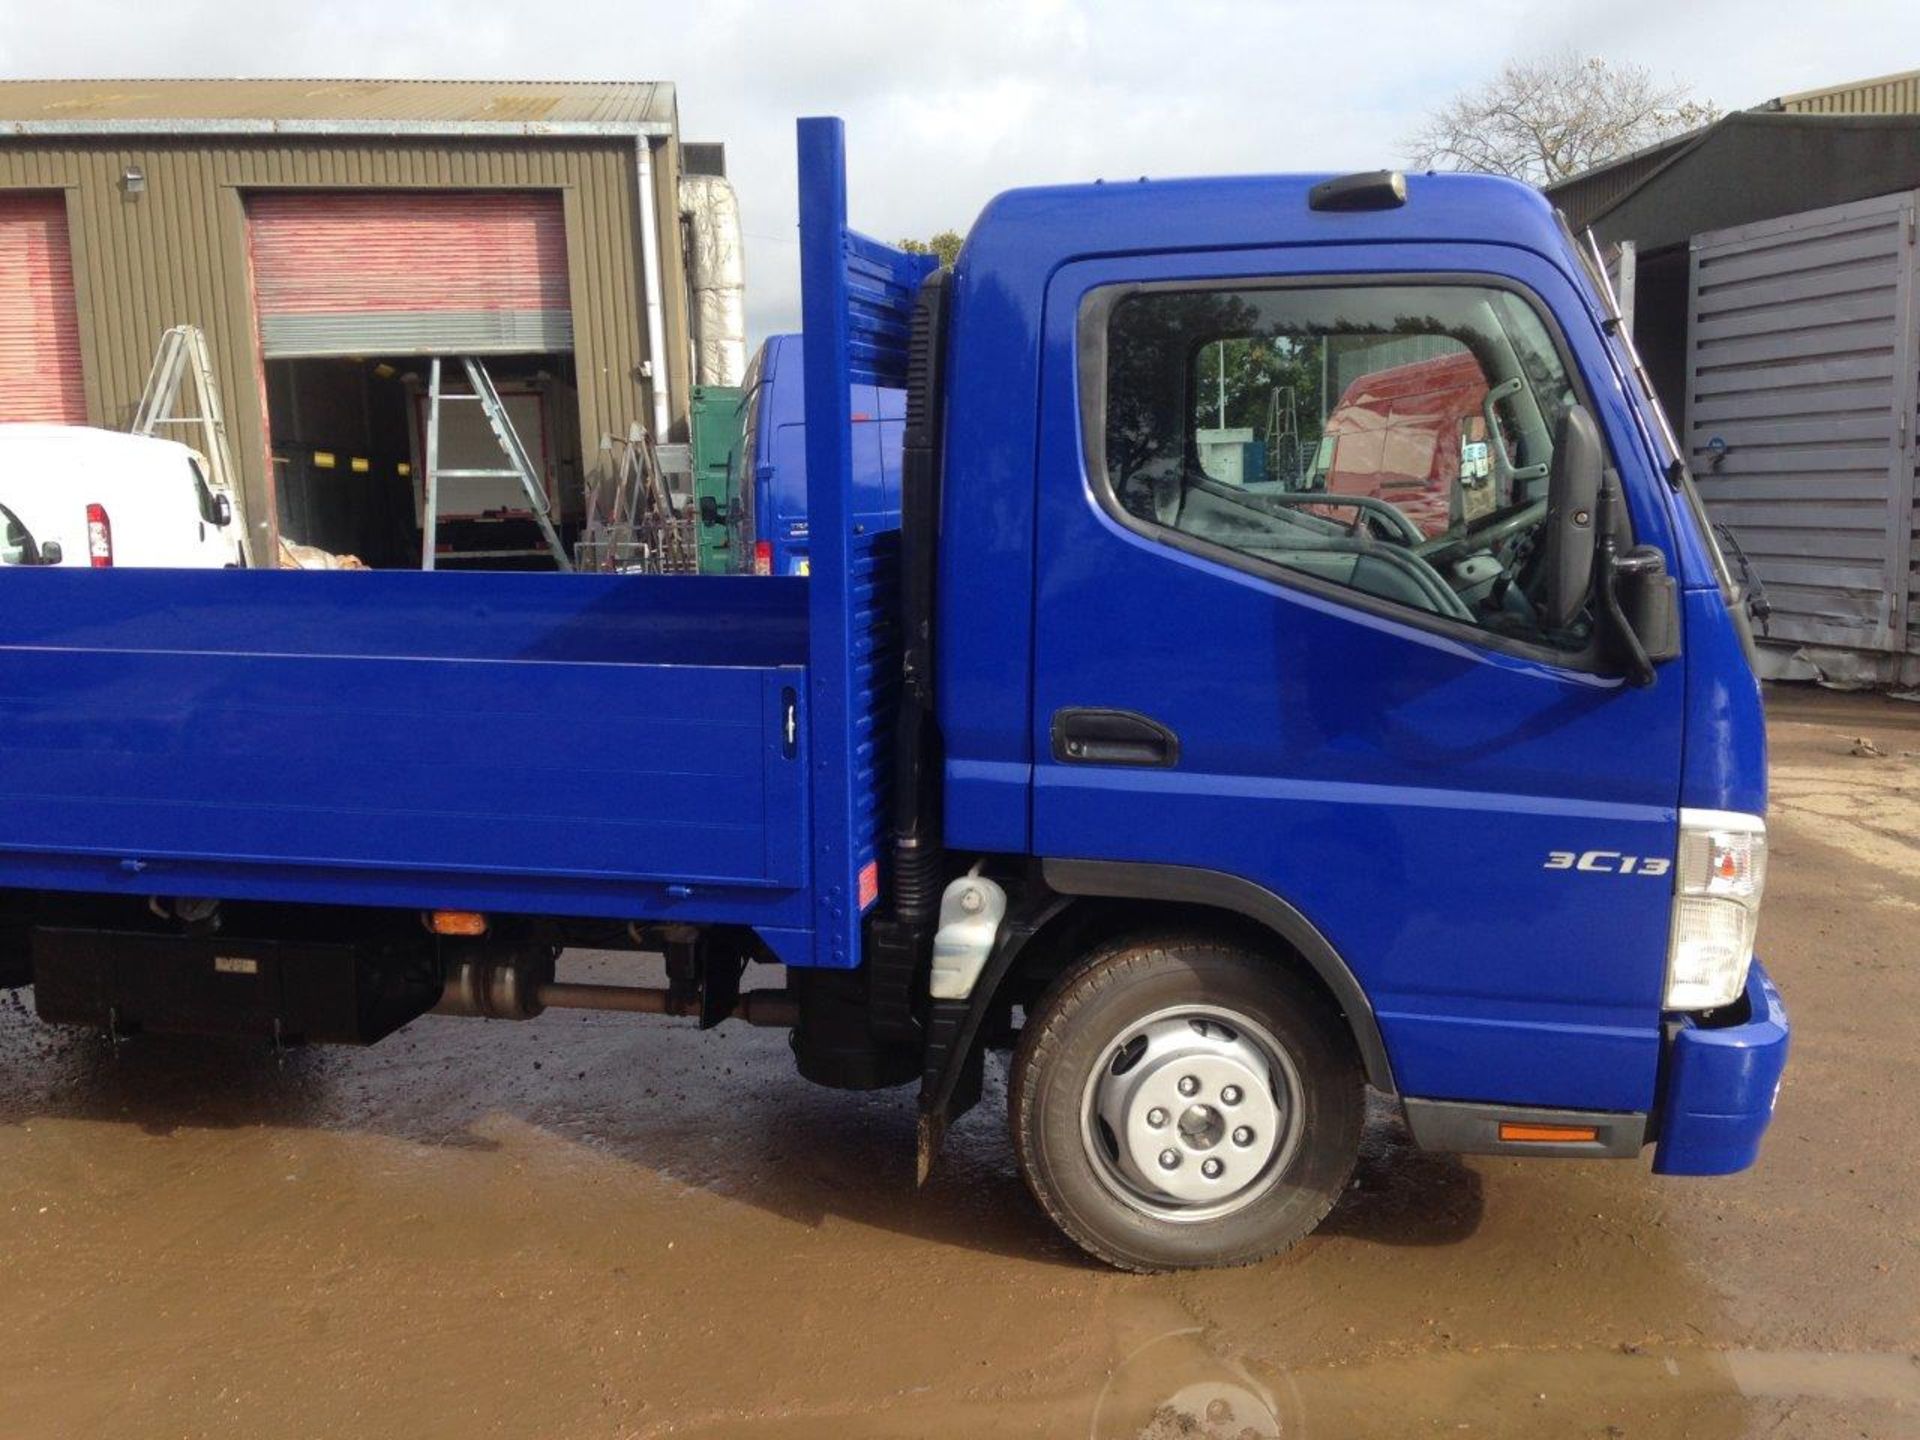 2009/59 REG MITSUBISHI FUSO CANTER 3C13-34 LWB 14 FT DROPSIDE TRUCK ONE OWNER - Image 3 of 10